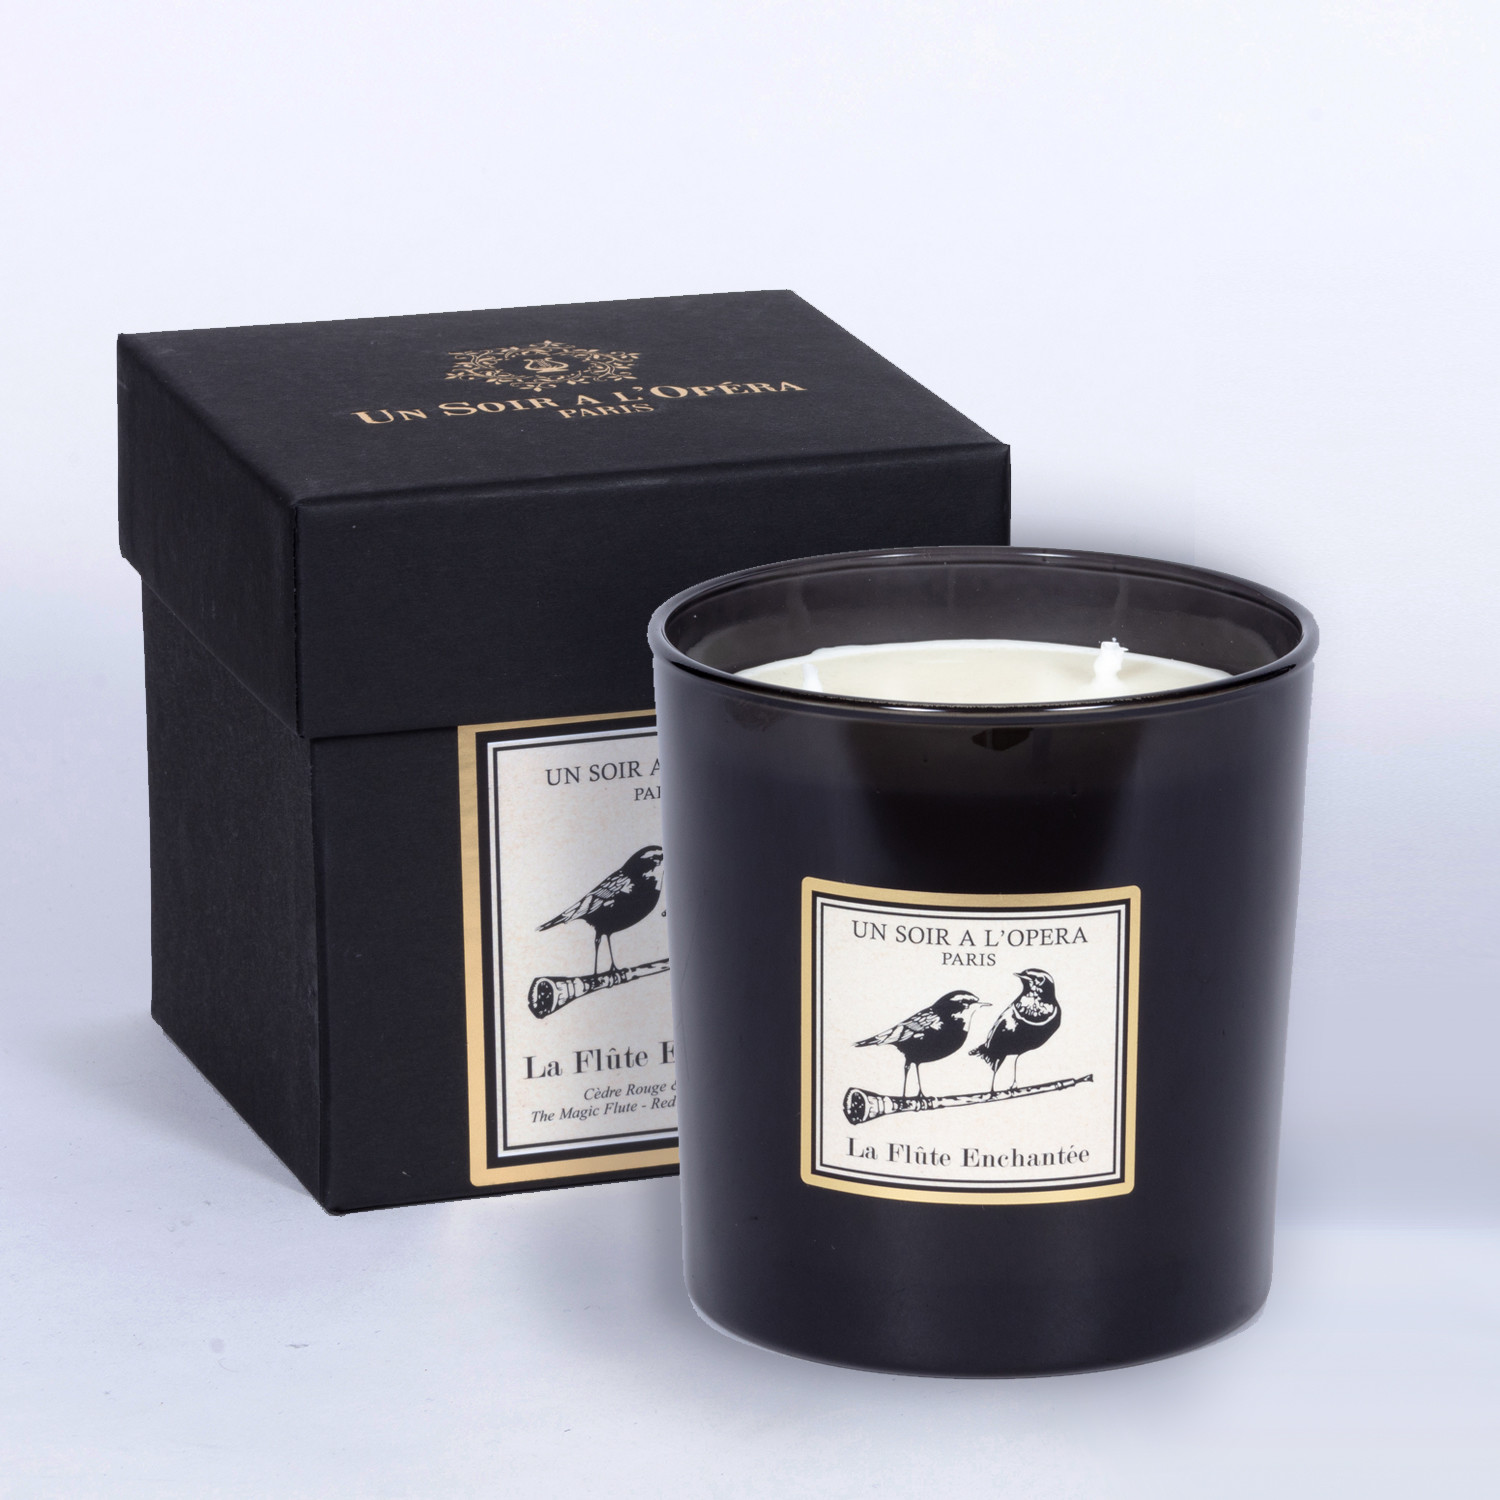 Cedar wood and rose - Luxury scented candle 500g - THE MAGIC FLUTE